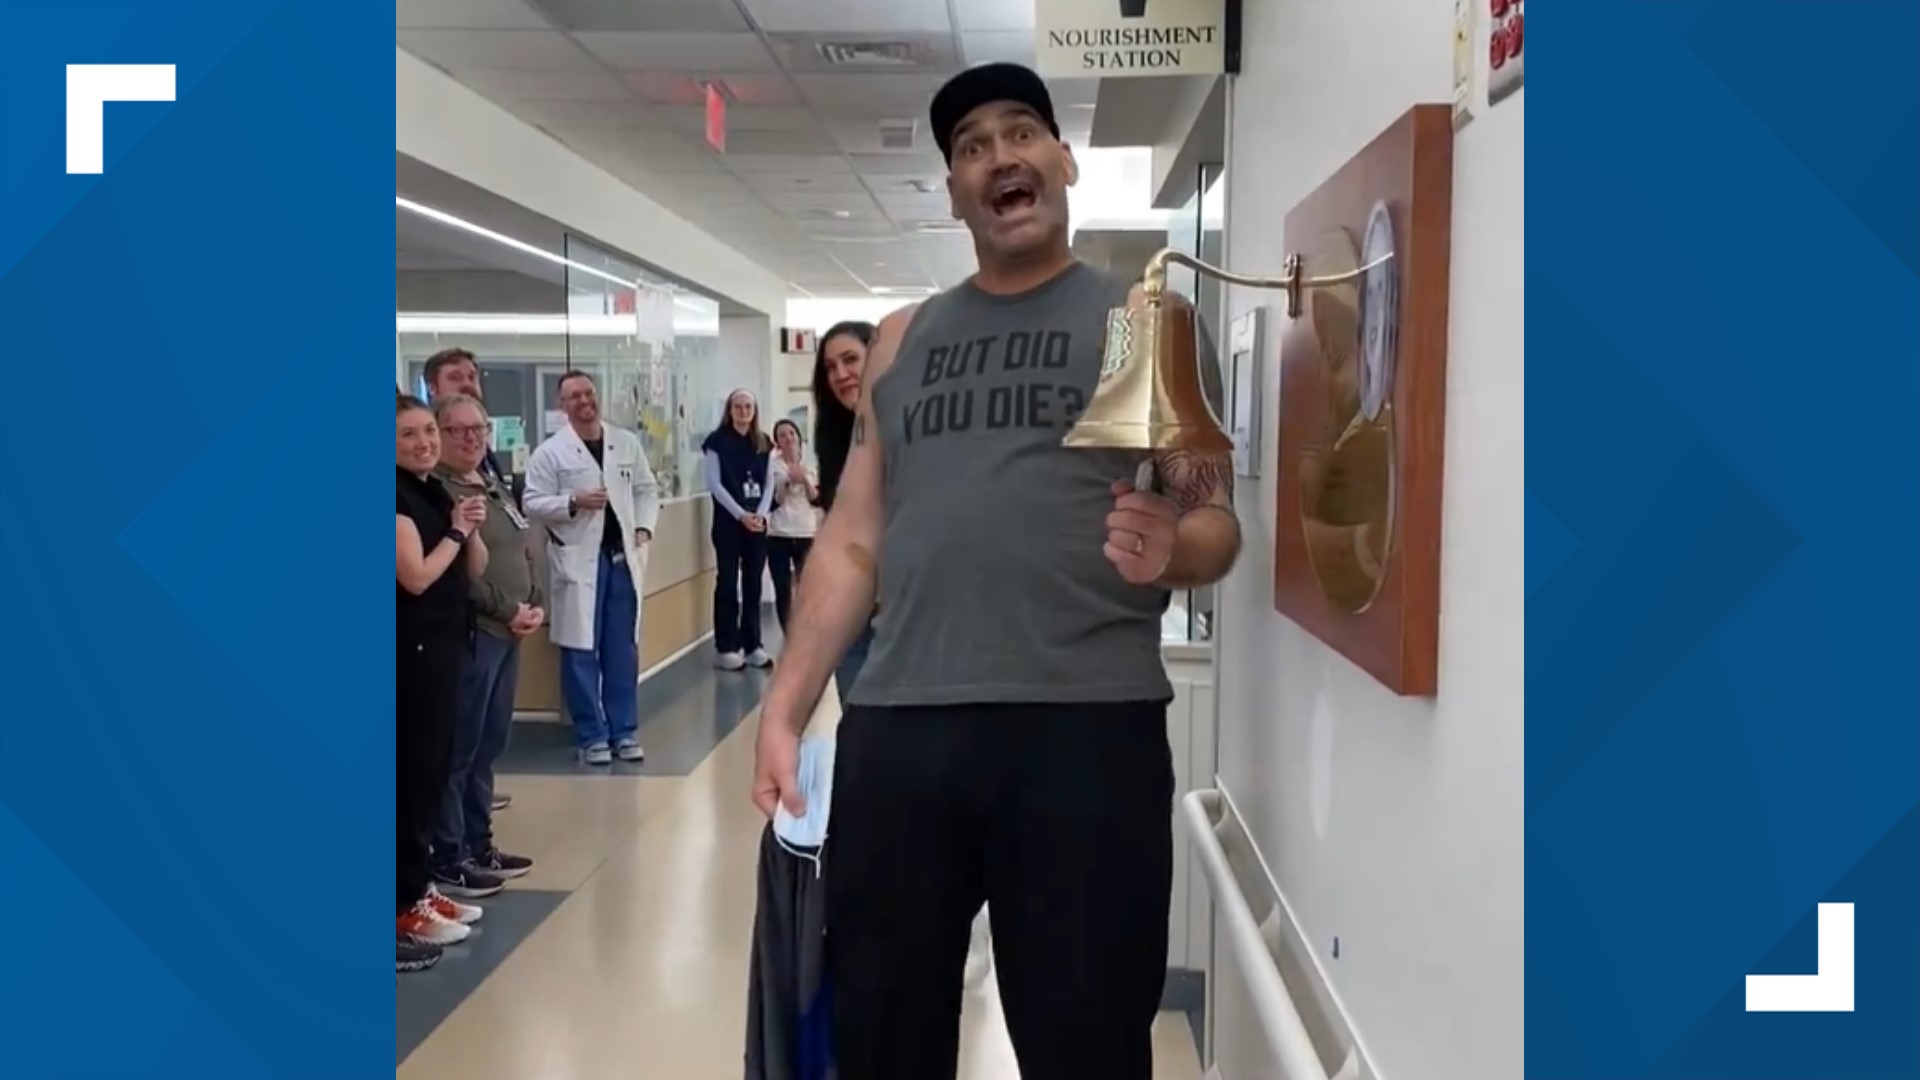 Pollard danced down the hallway, greeting doctors and medical staff before ringing the bell and leaving a Nashville hospital.